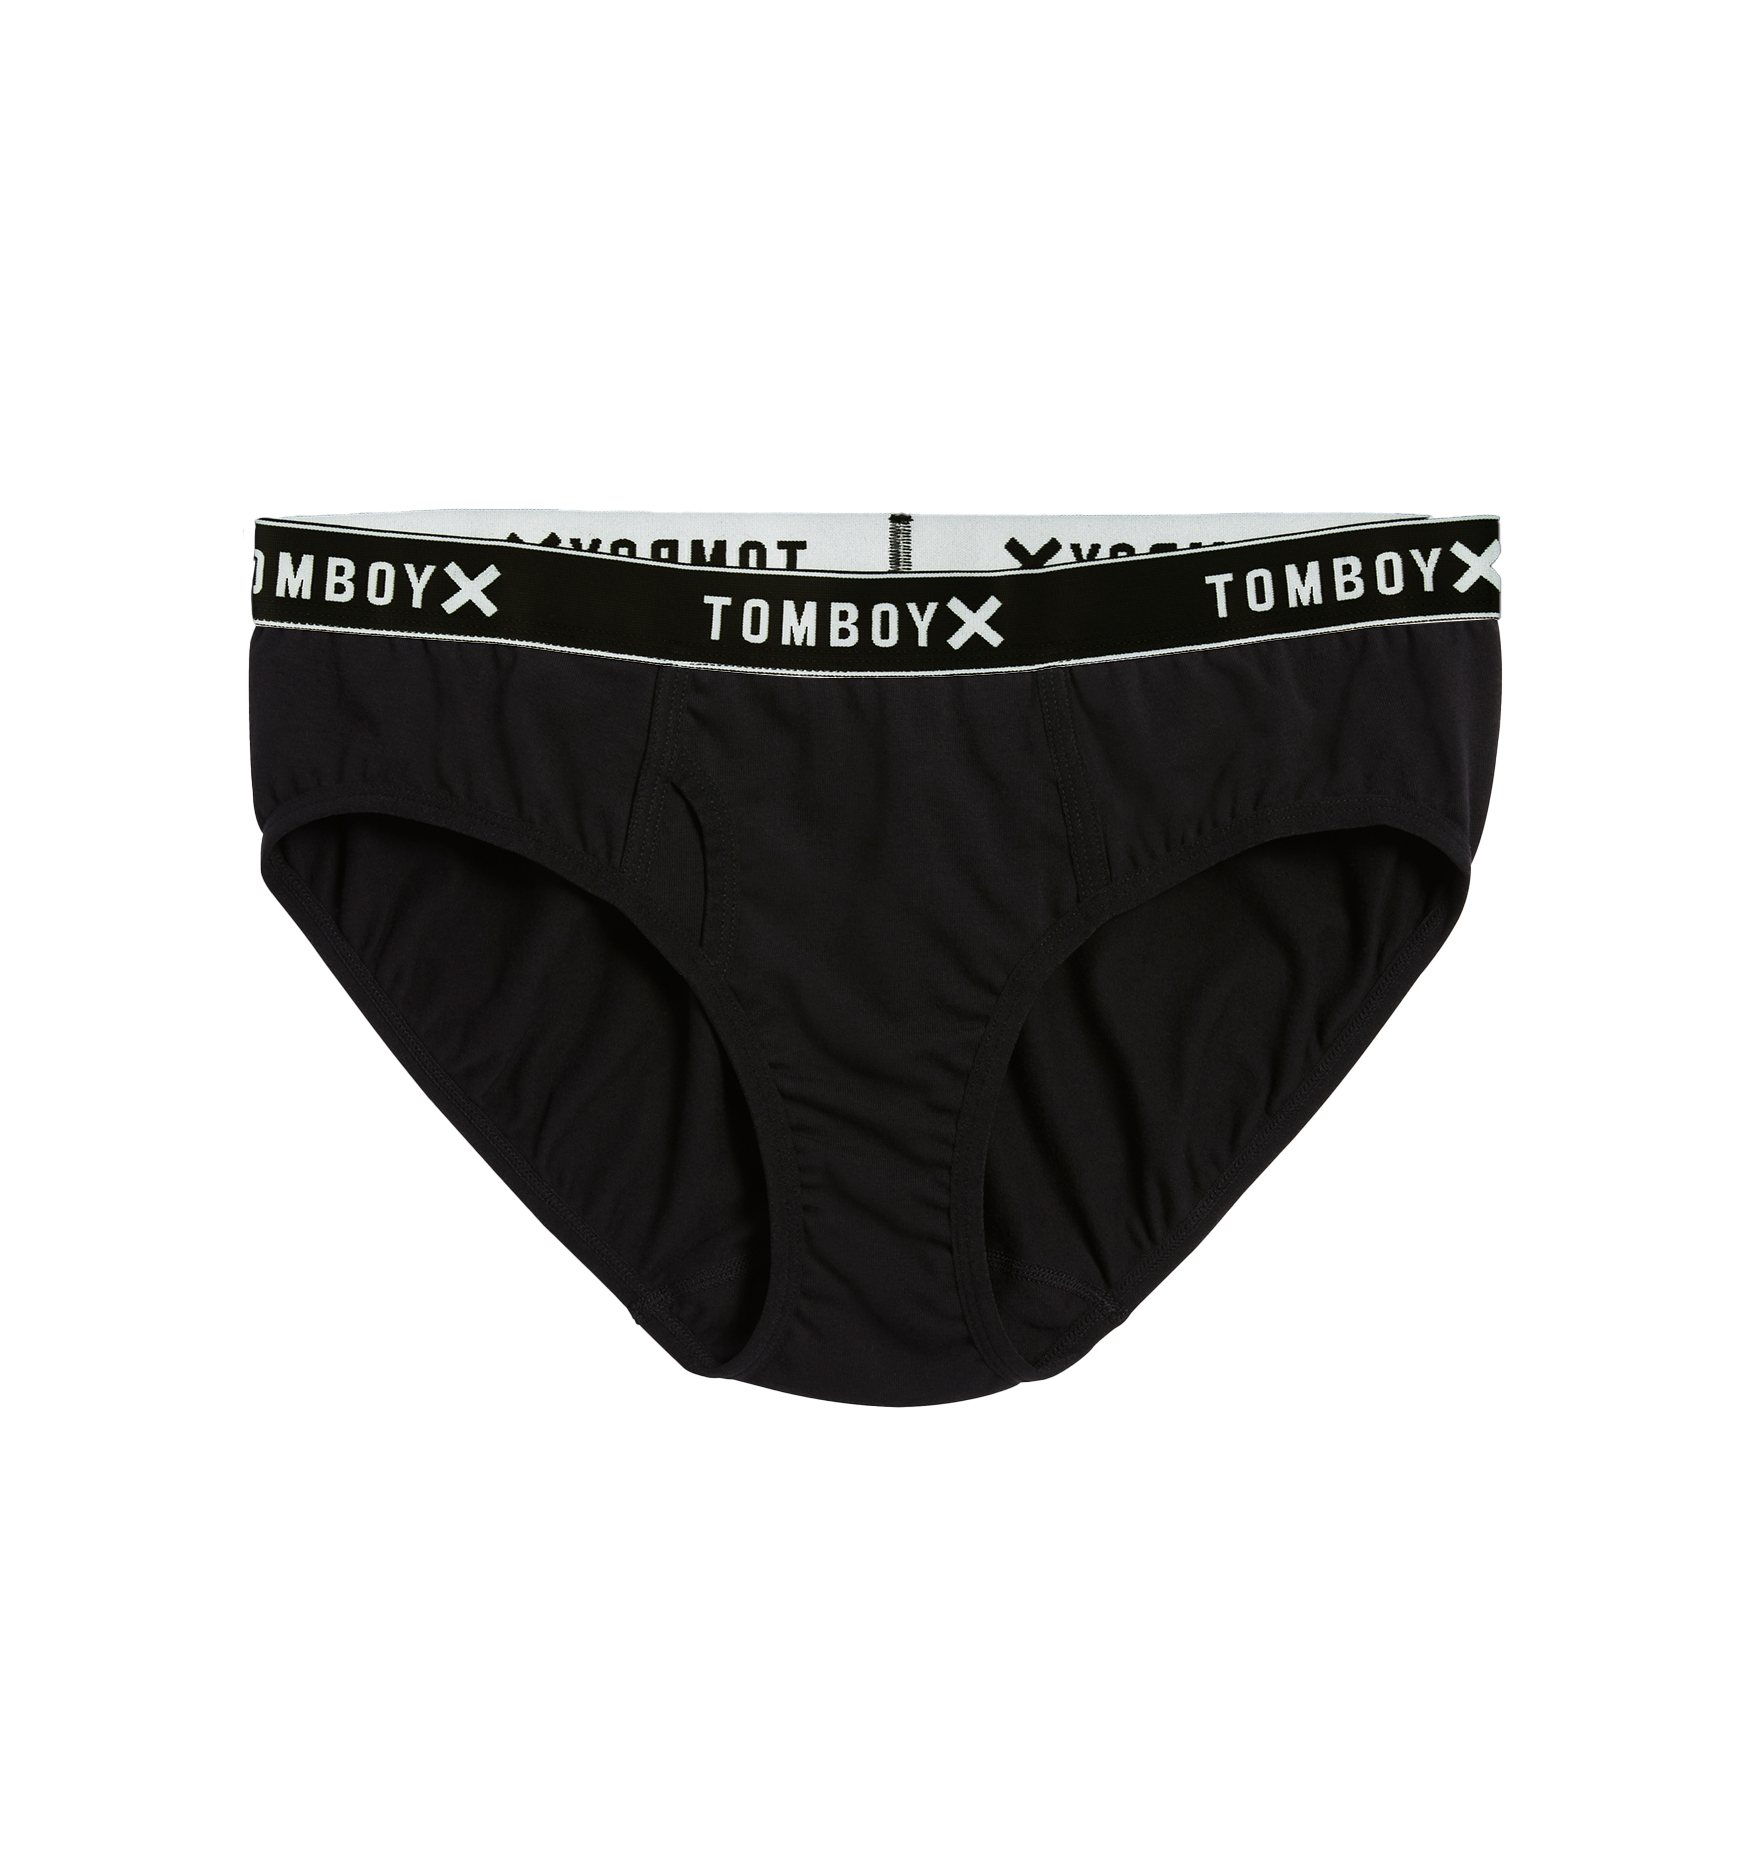 TENCEL™ Modal Underwear  Soft With A Perfect Fit – TomboyX